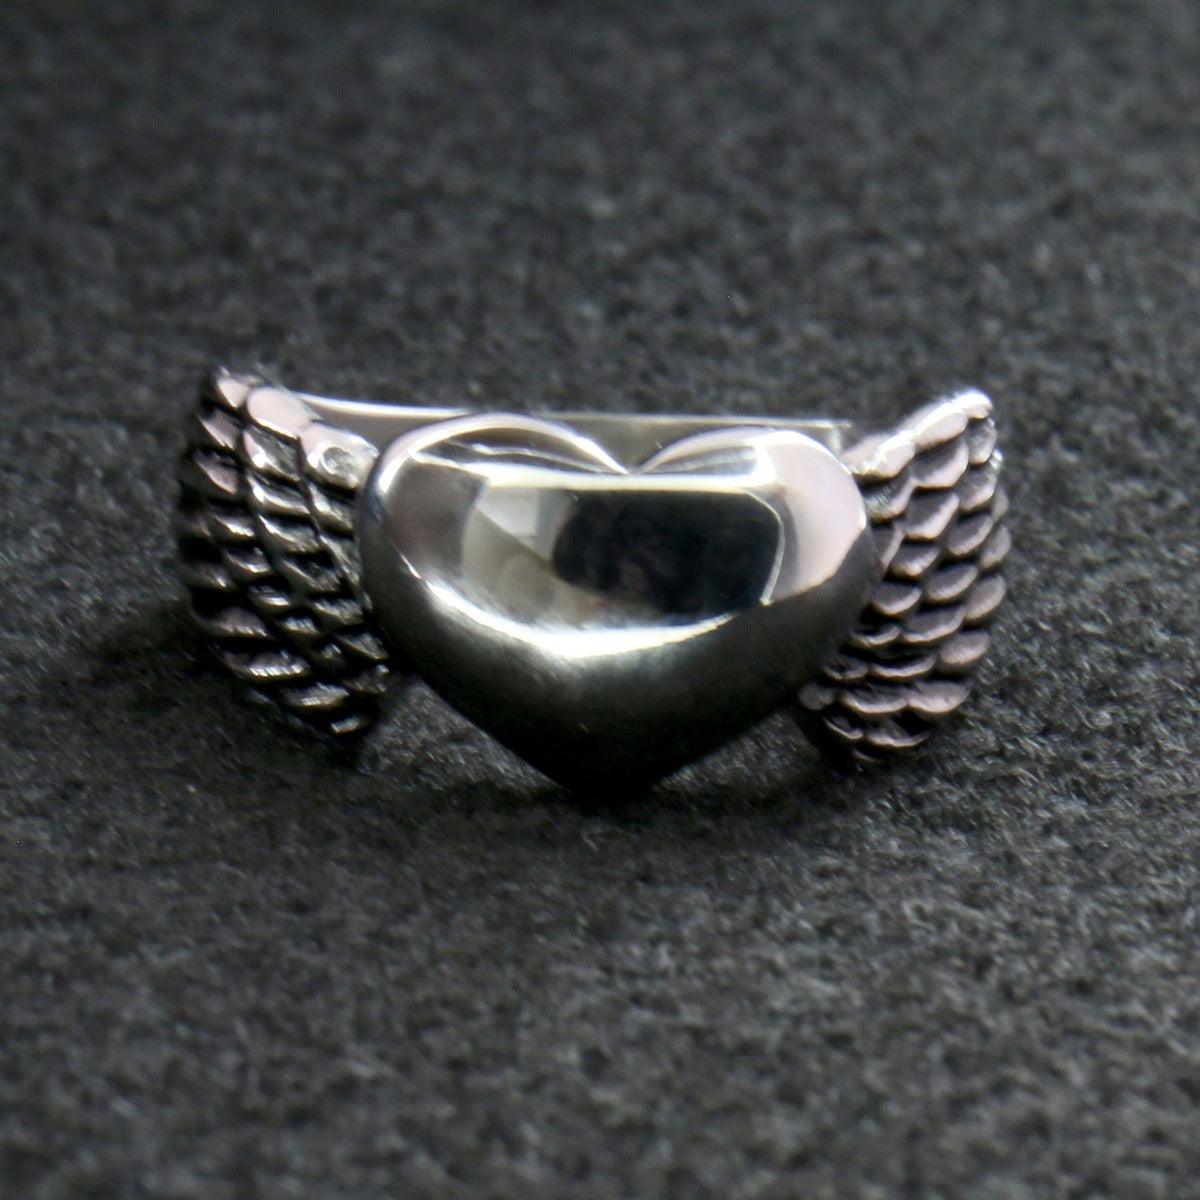 Hot Leathers Winged Heart Ring - American Legend Rider